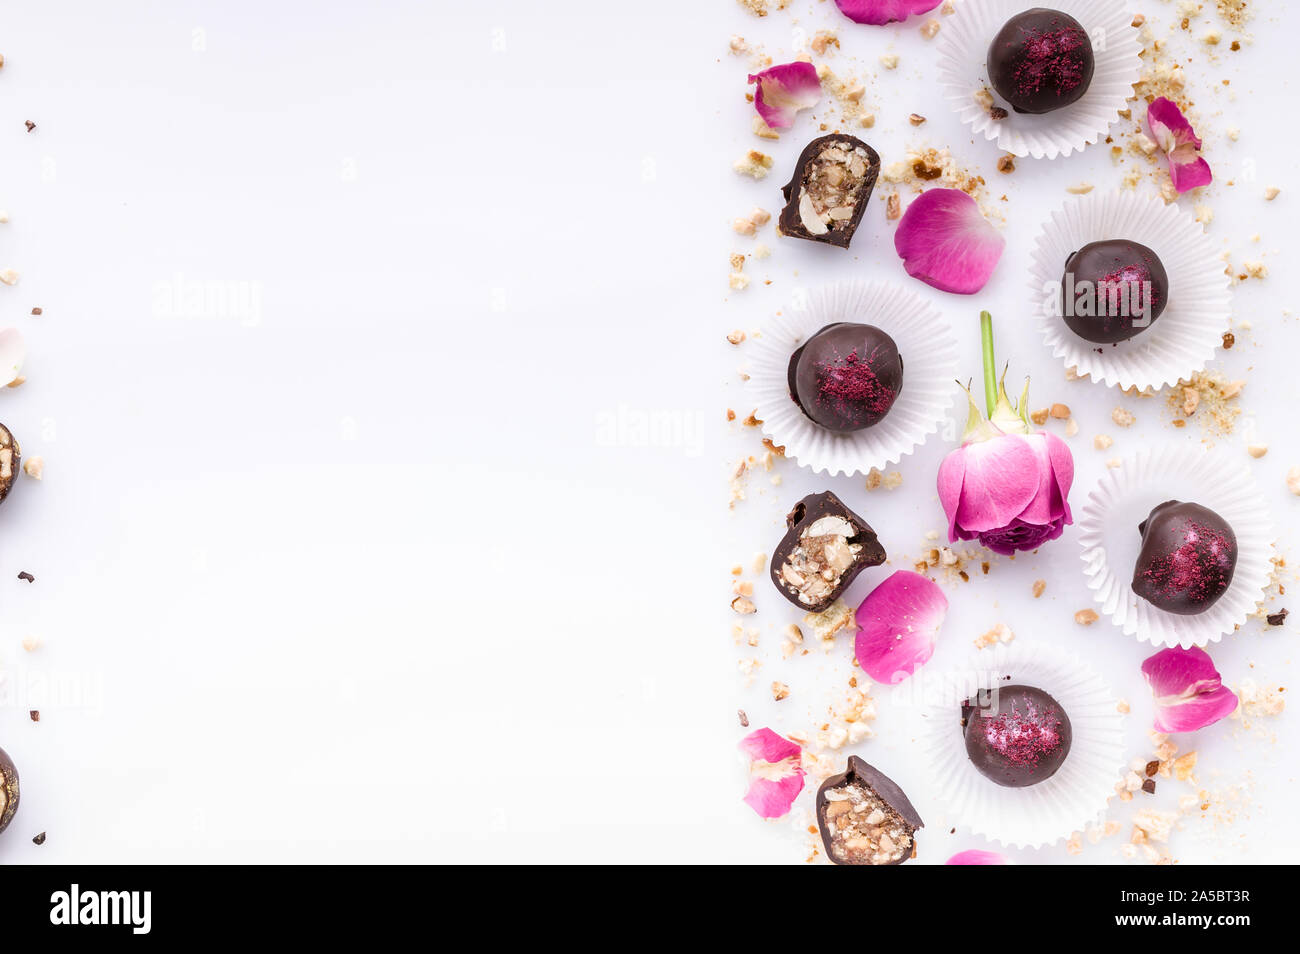 Sweet pattern. Top view handmade chocolate candies with nuts and honey. Gourmet chocolates on a white background. Close-up. Soft focus. Copy space Stock Photo